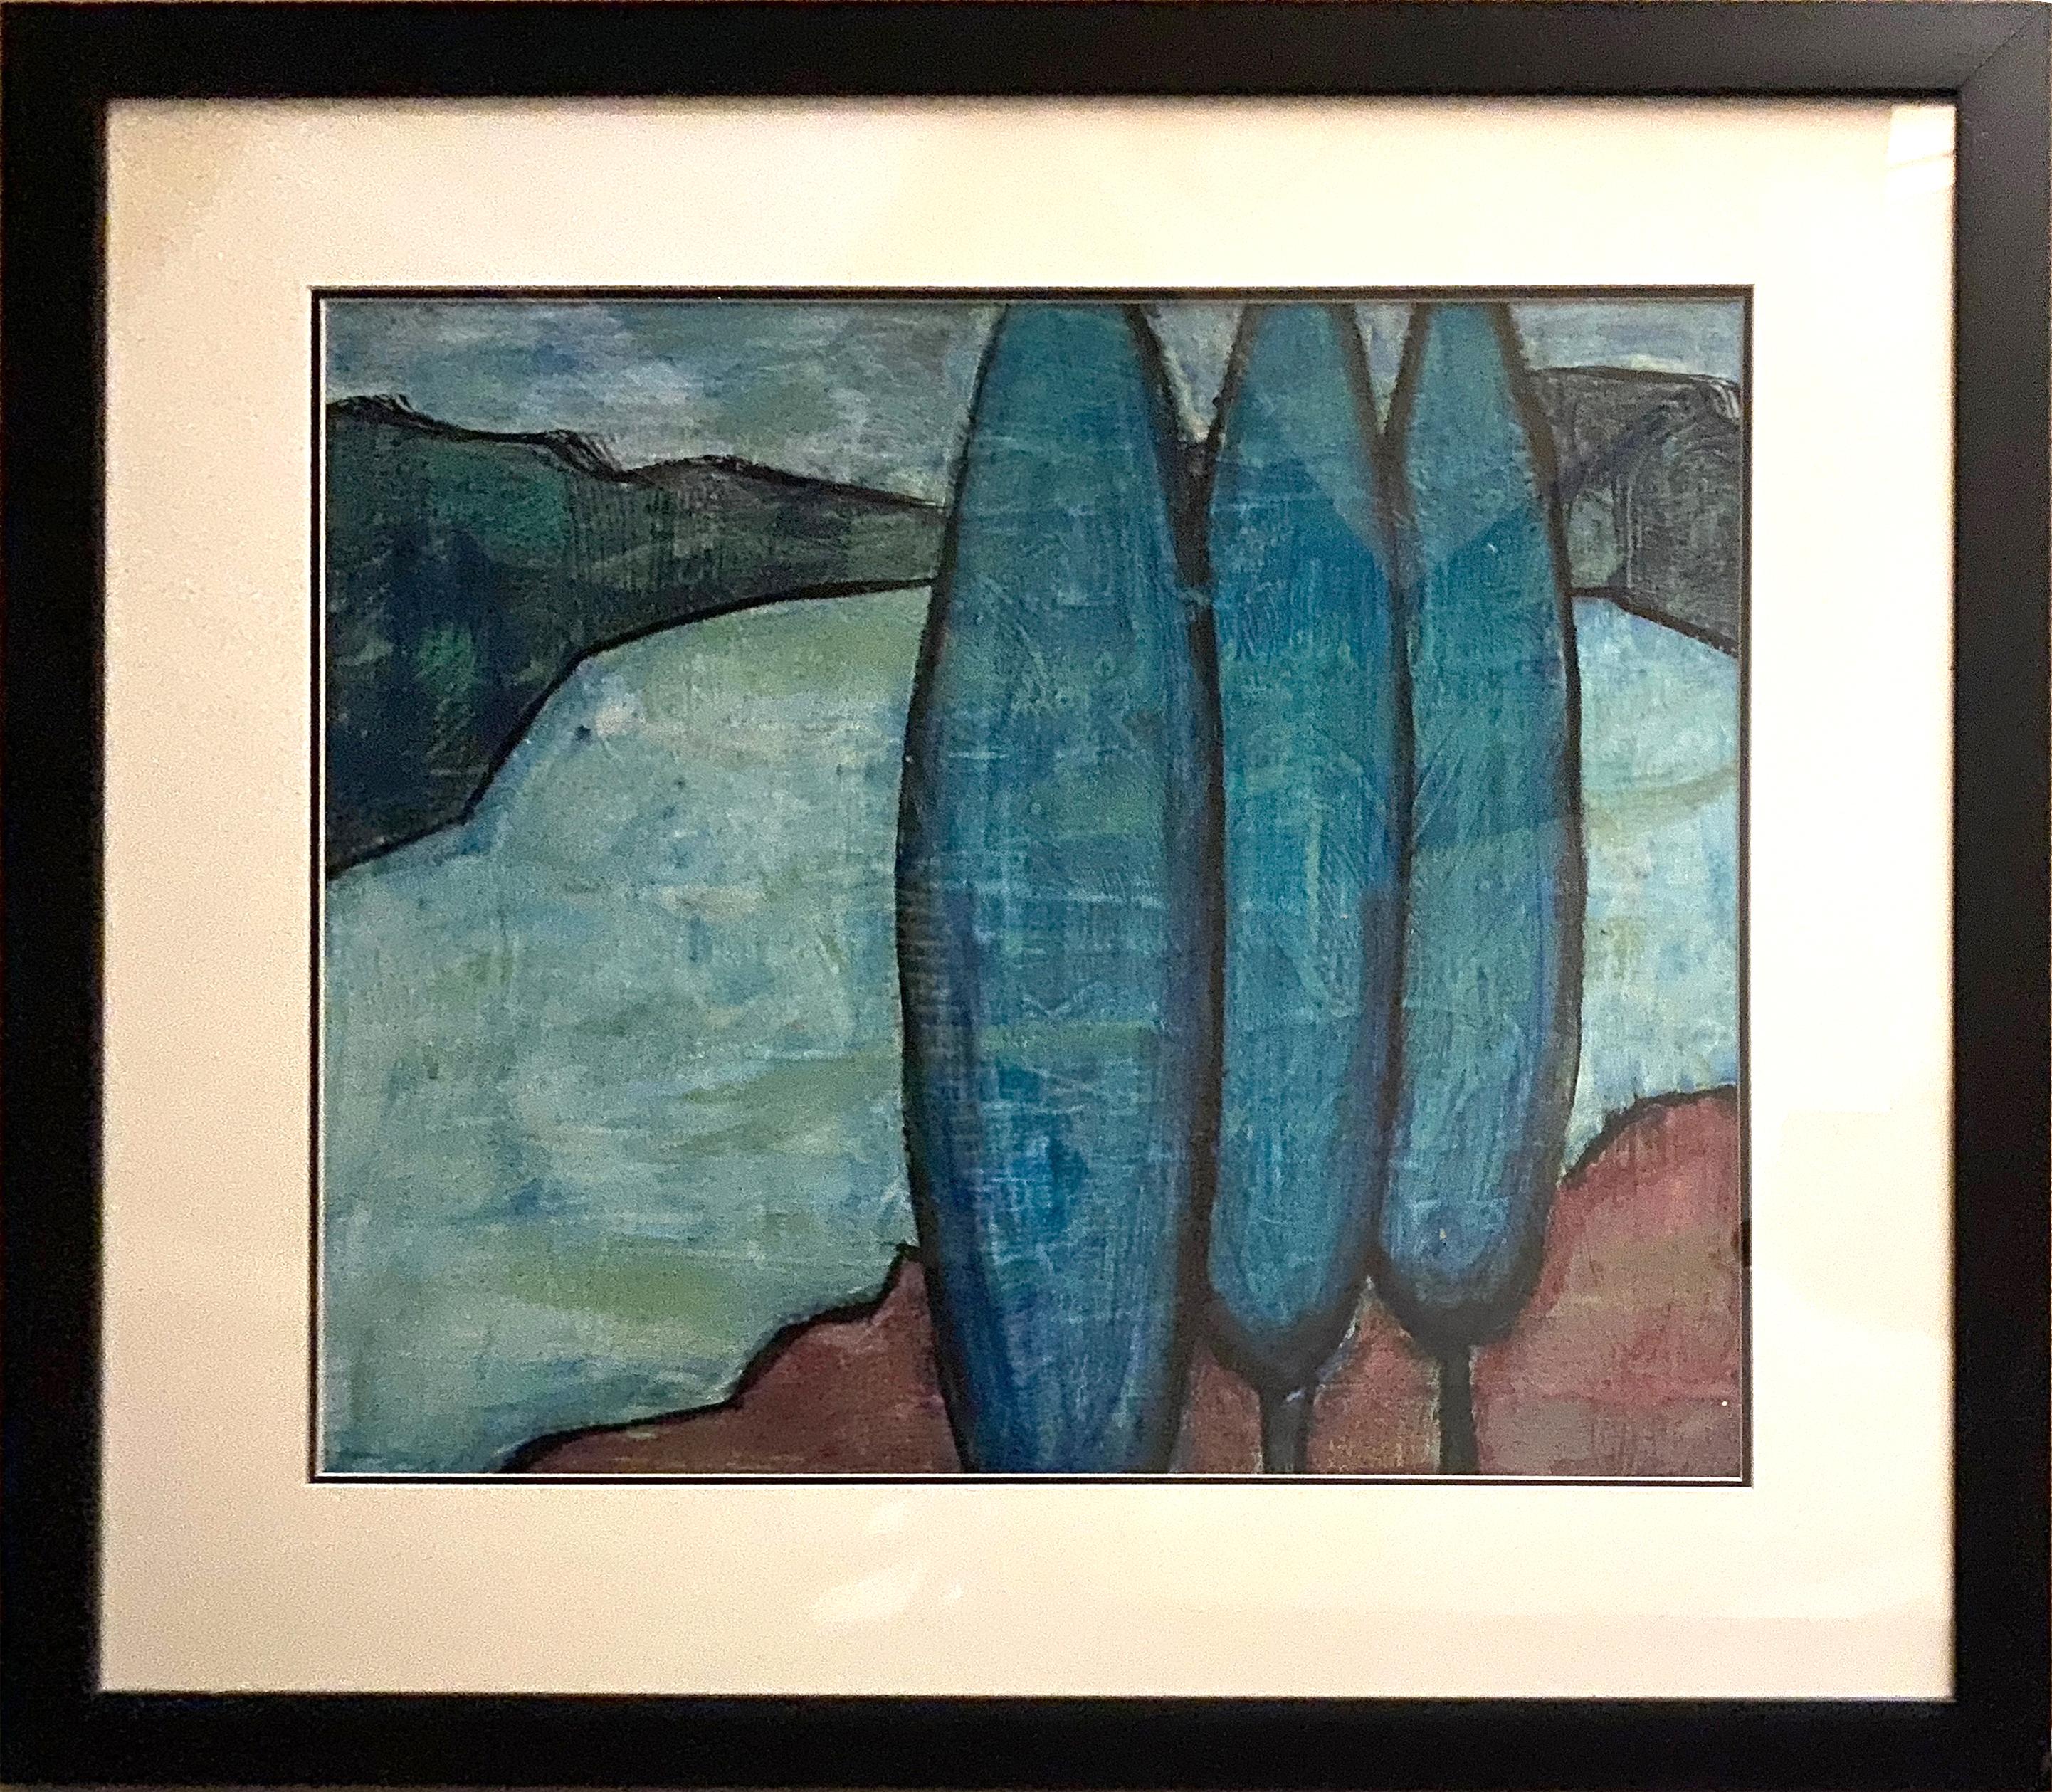 This is a contemporary landscape and is part of the 'Lake Shore' series by the artist. Its surface is covered with simplified pliable forms that are filled with fresh hues of turquoise blues and reds. The smoothness it brings makes the viewer